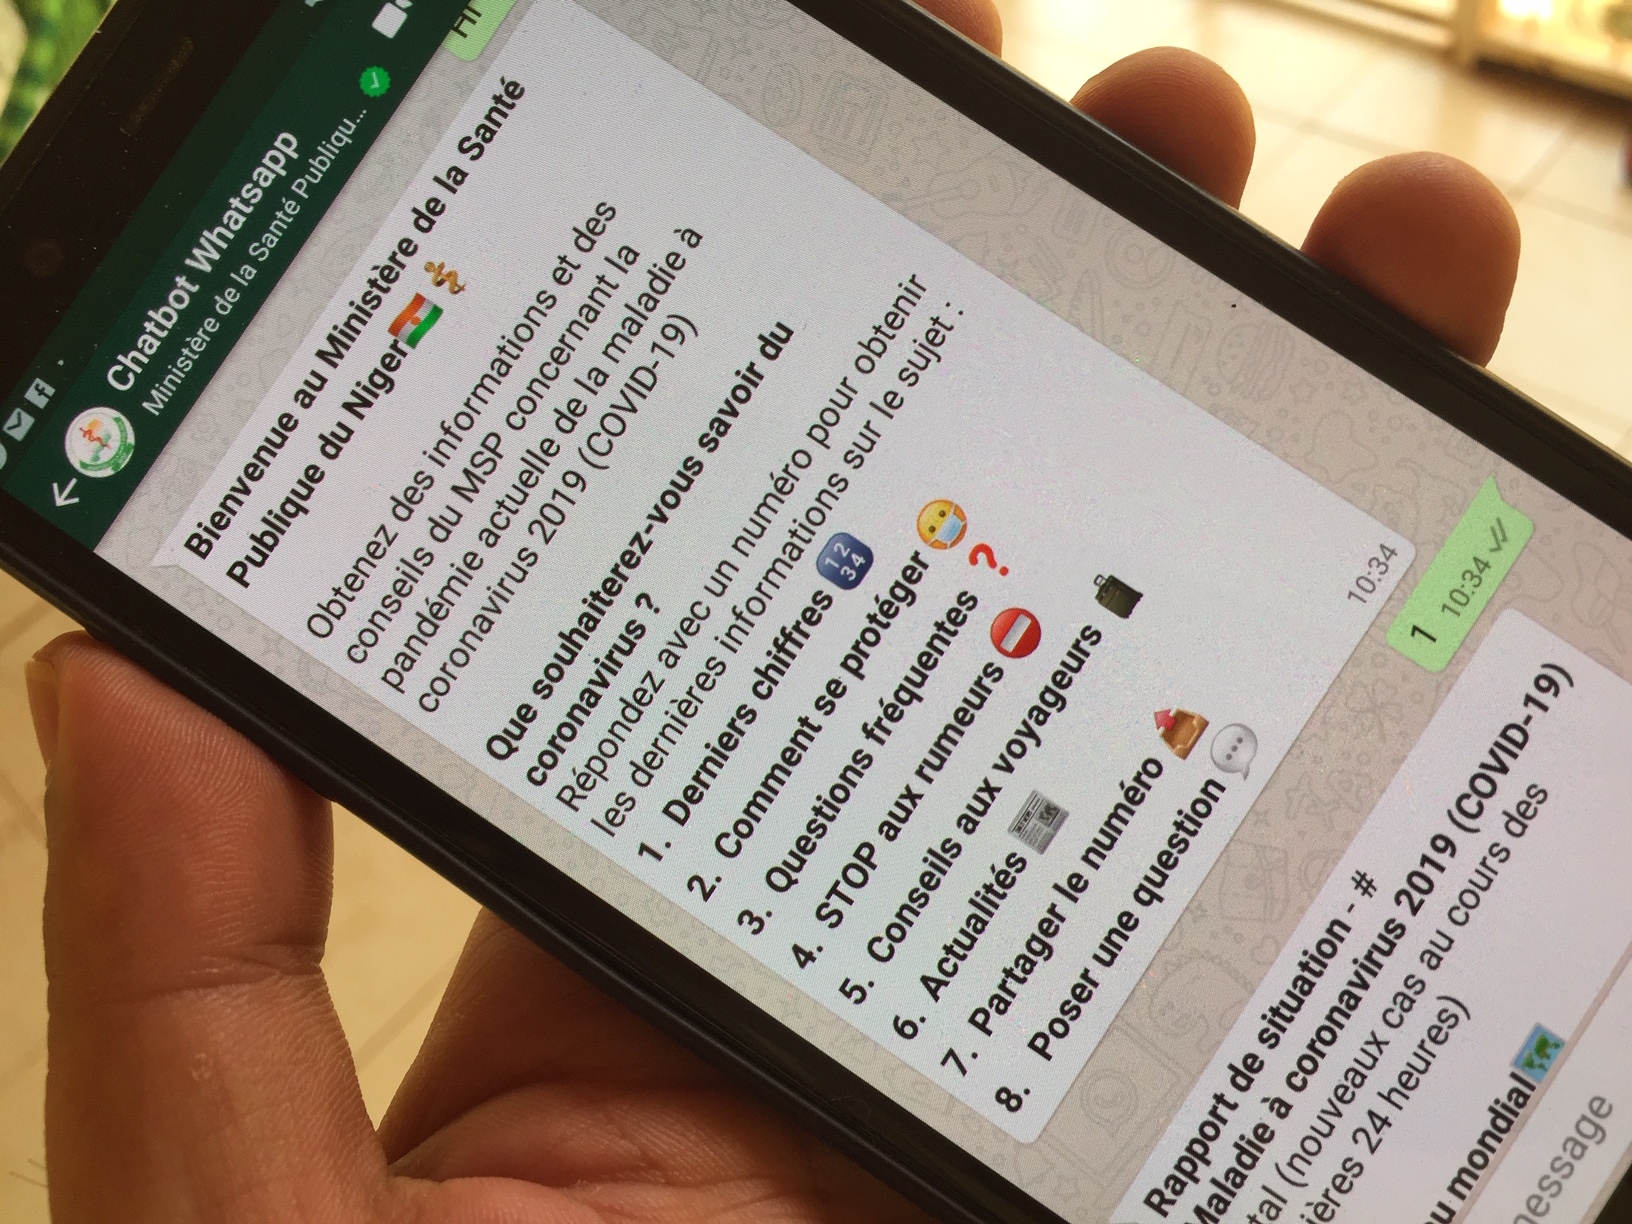 Niger launches chatbot on Whatsapp to answer COVID-19 queries